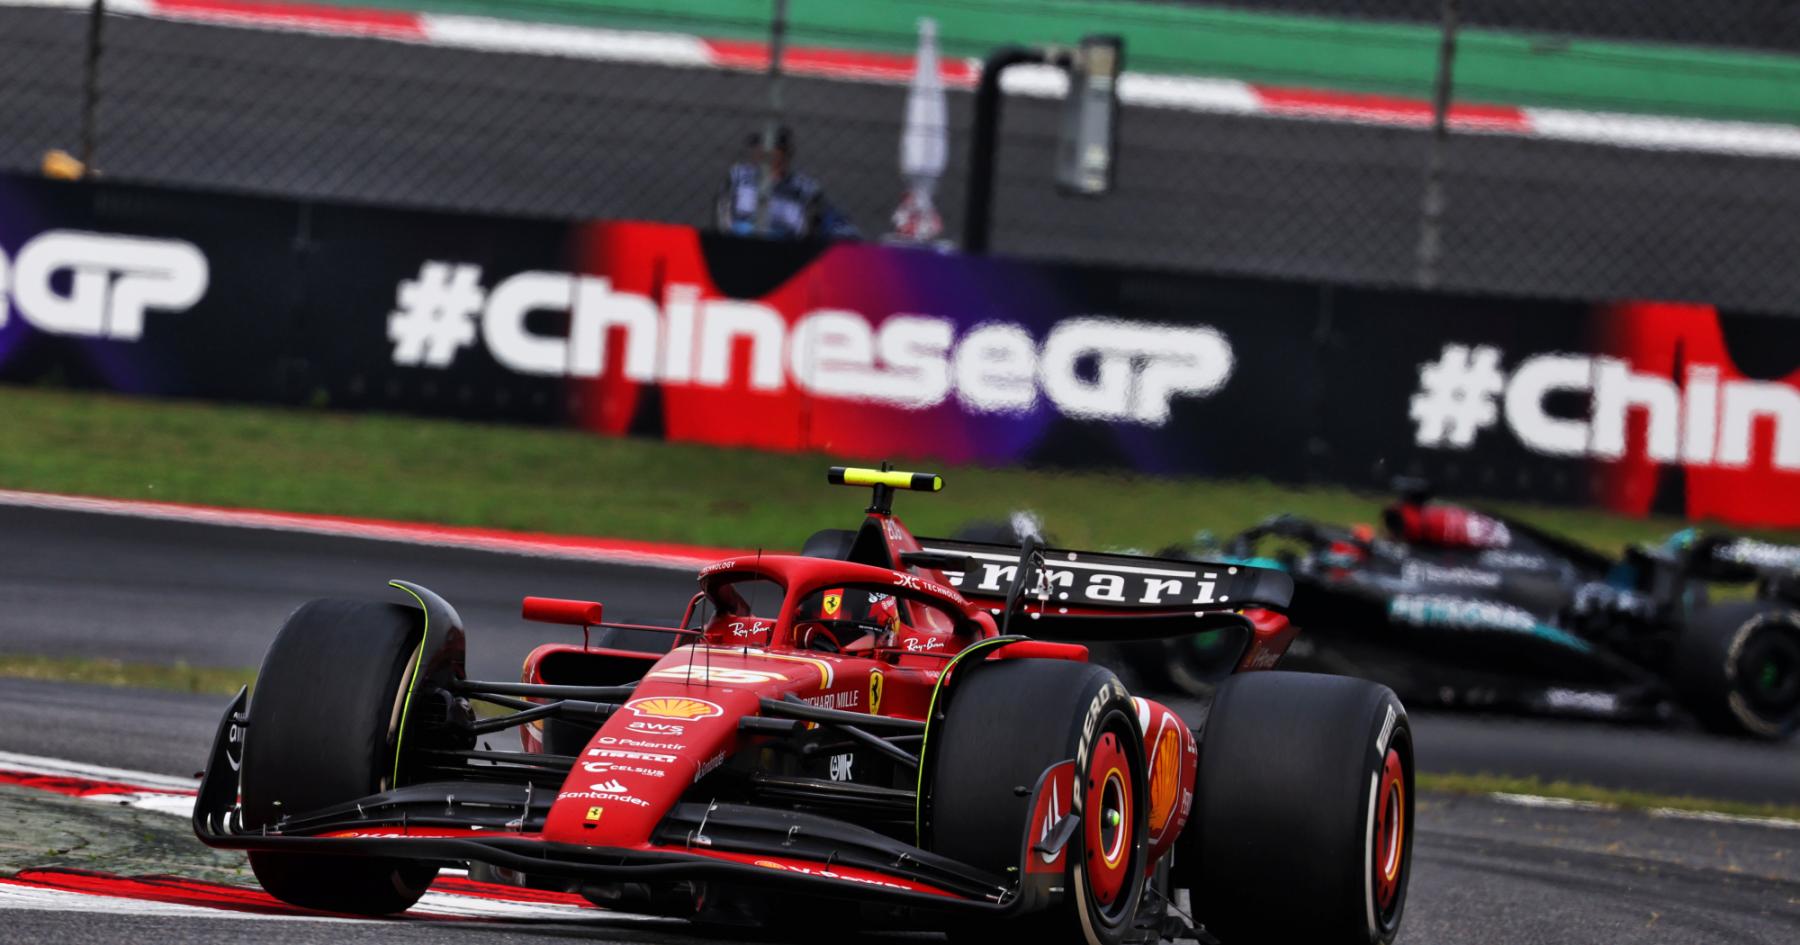 Ferrari's Sainz Demands Change After a Disappointing Performance in China